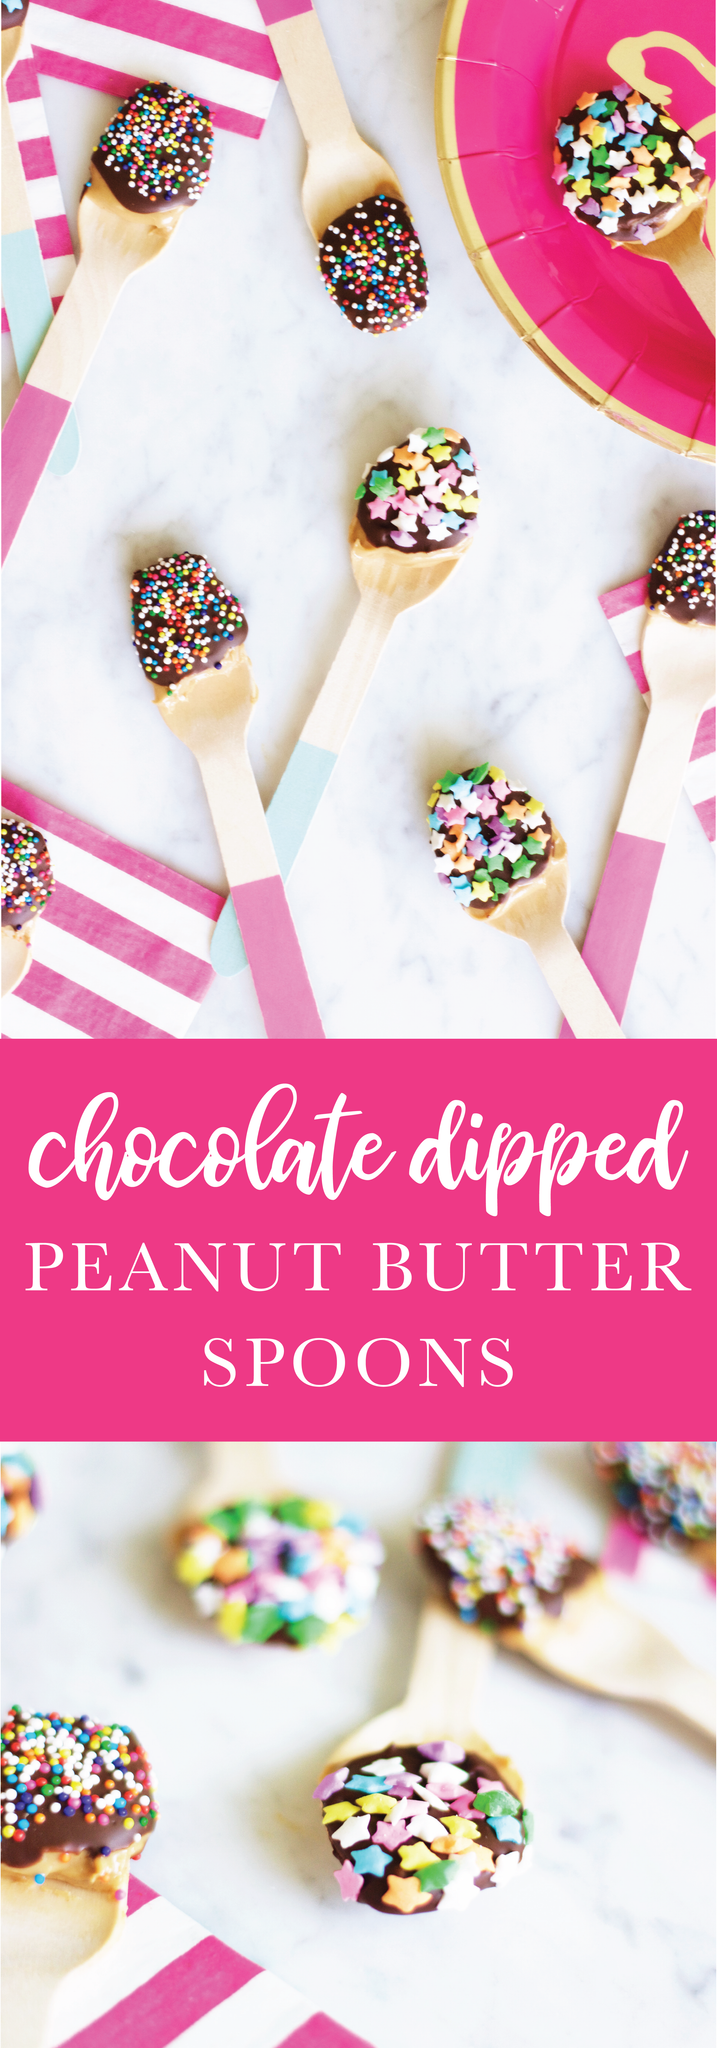 chocolate dipped peanut butter spoons by the little palm